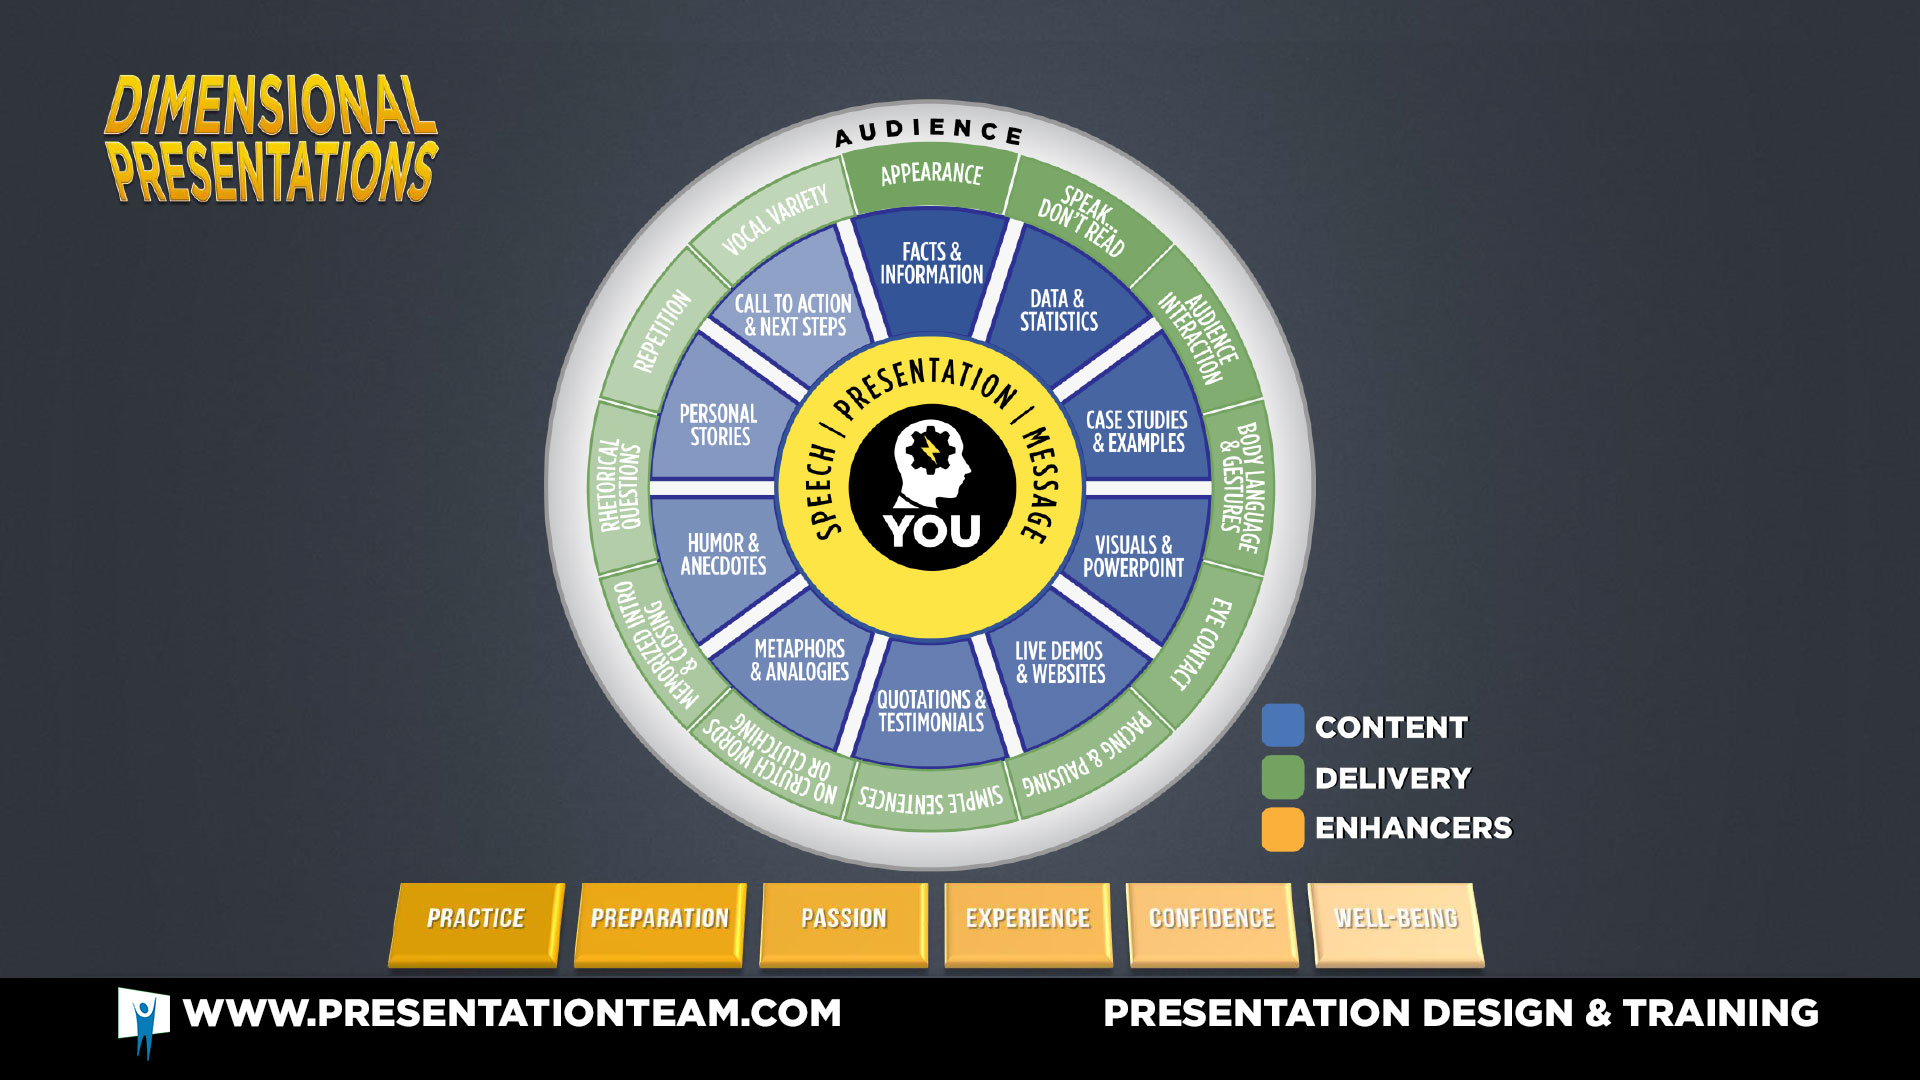 Dimensional Presentations - Tips, Pointers, and Inspiration for Great Presentations